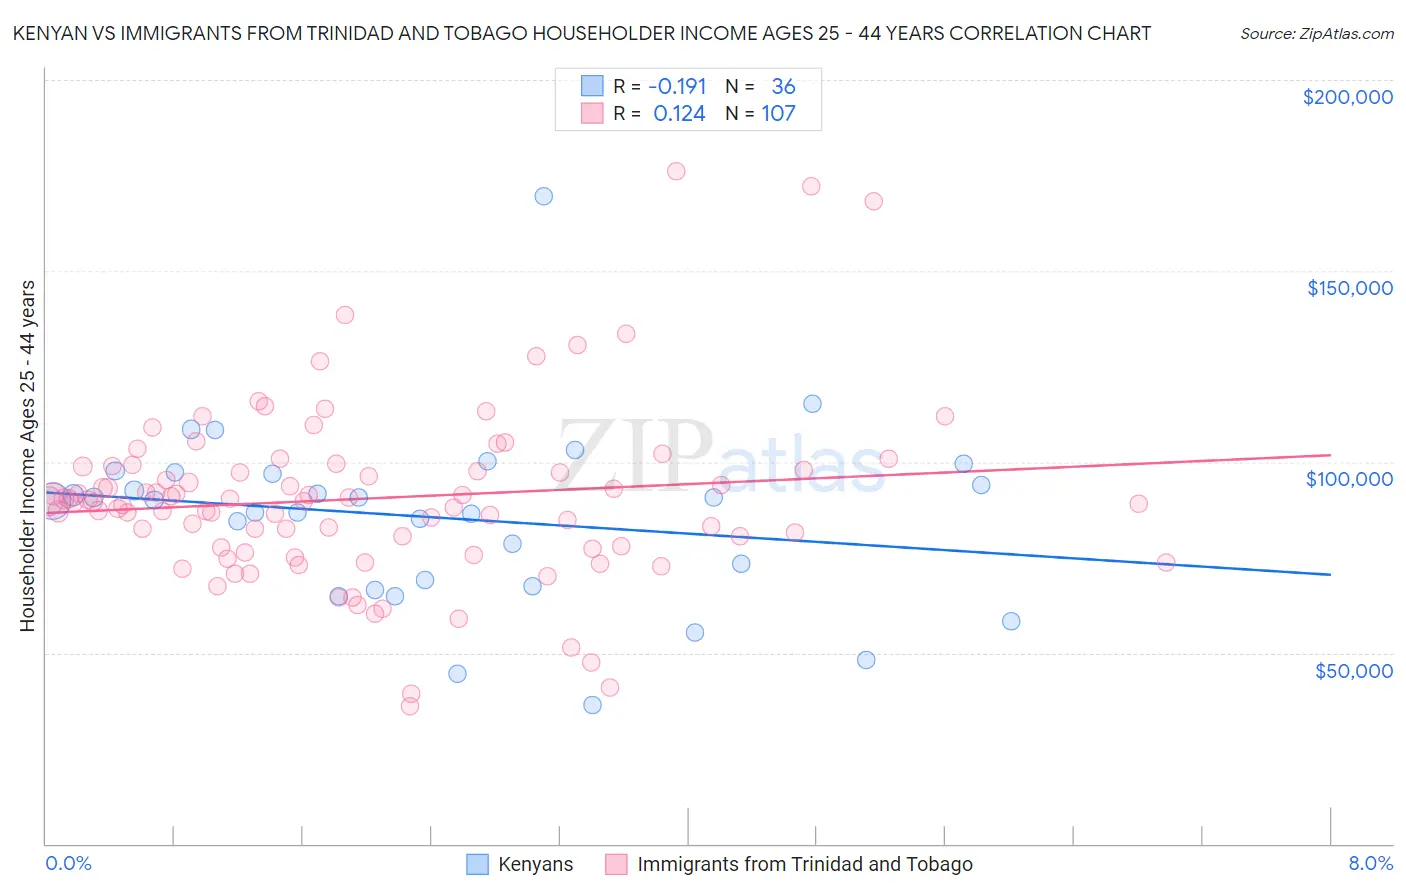 Kenyan vs Immigrants from Trinidad and Tobago Householder Income Ages 25 - 44 years